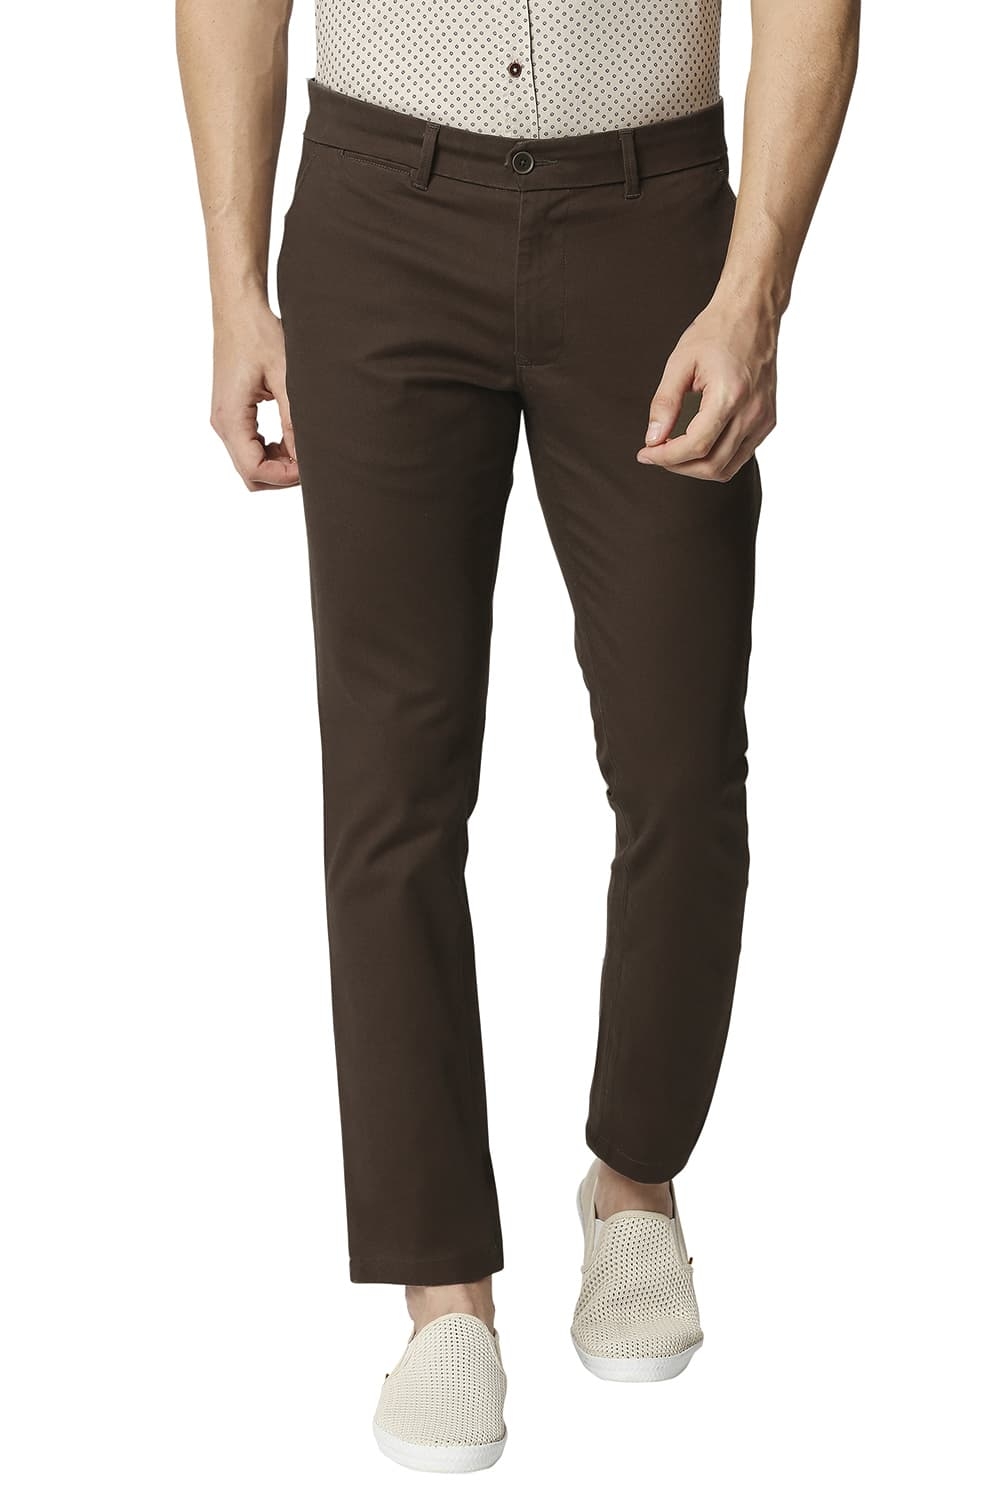 Basics | BASICS CASUAL SELF MID BROWN COTTON STRETCH TAPERED TROUSERS 